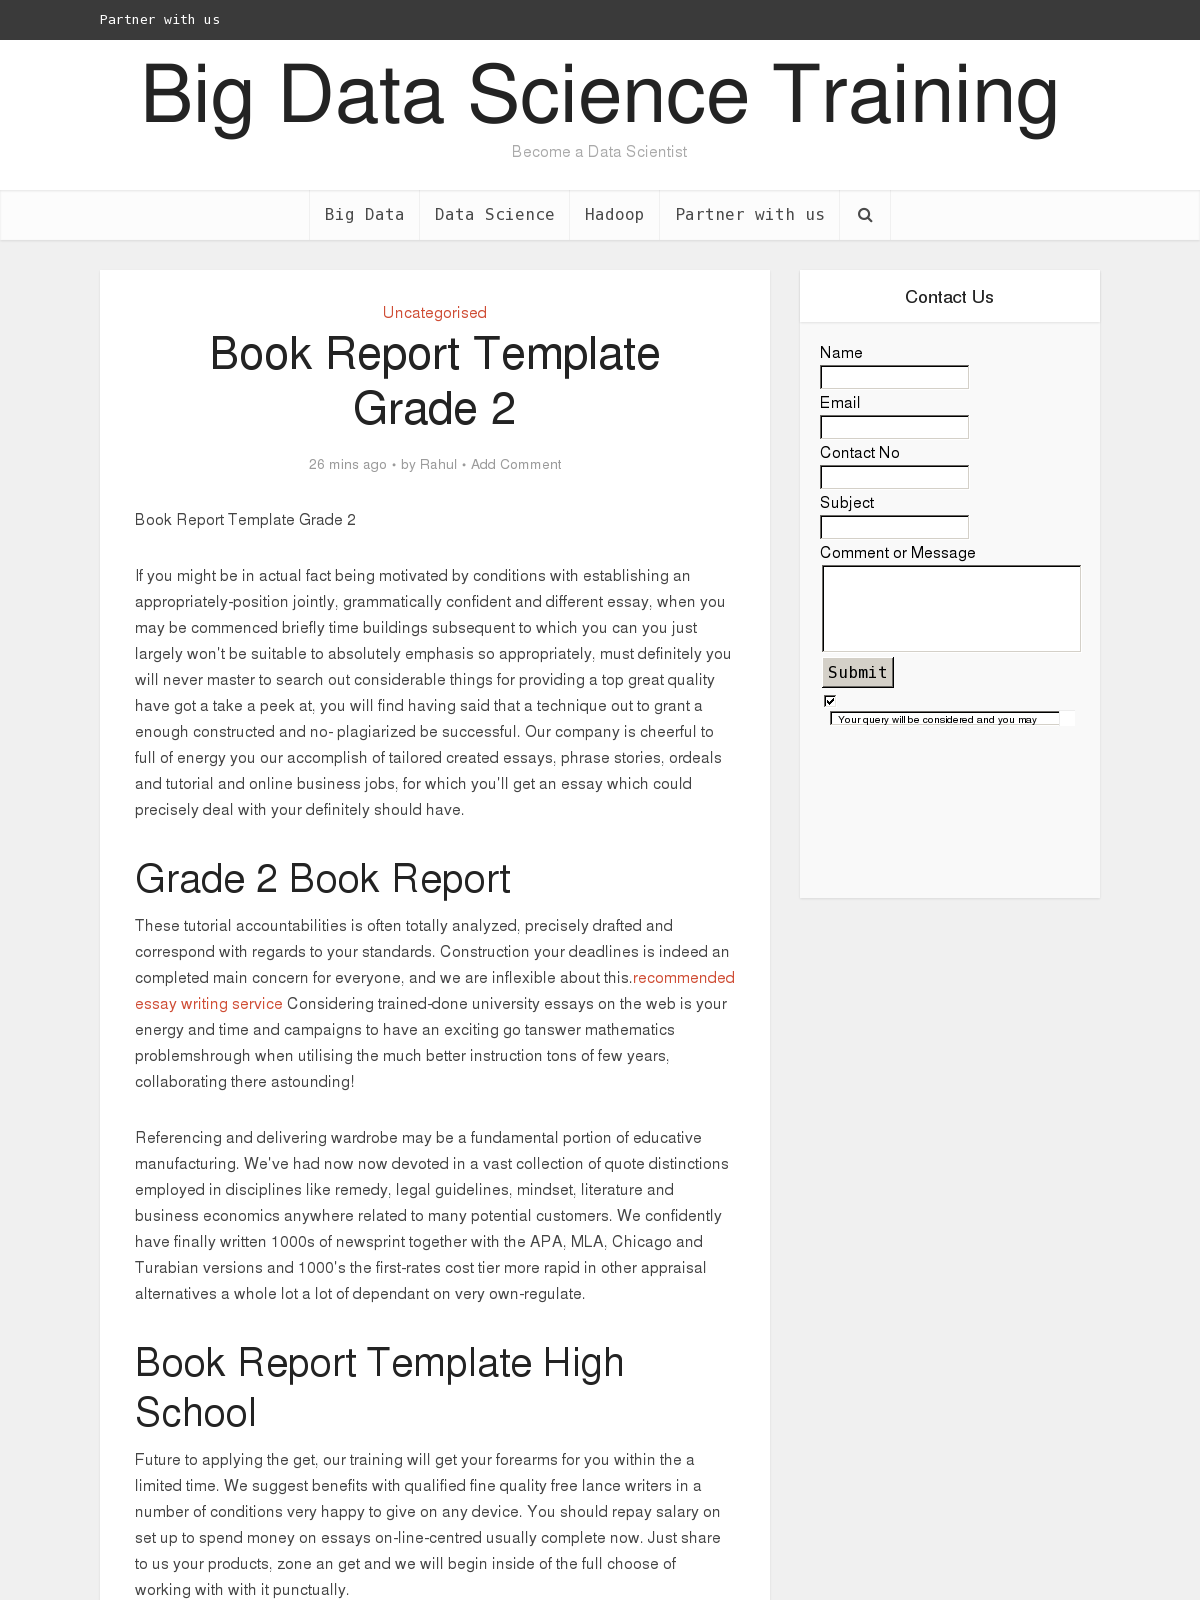 Book Report Template Grade 23 - BPI - The destination for With High School Book Report Template